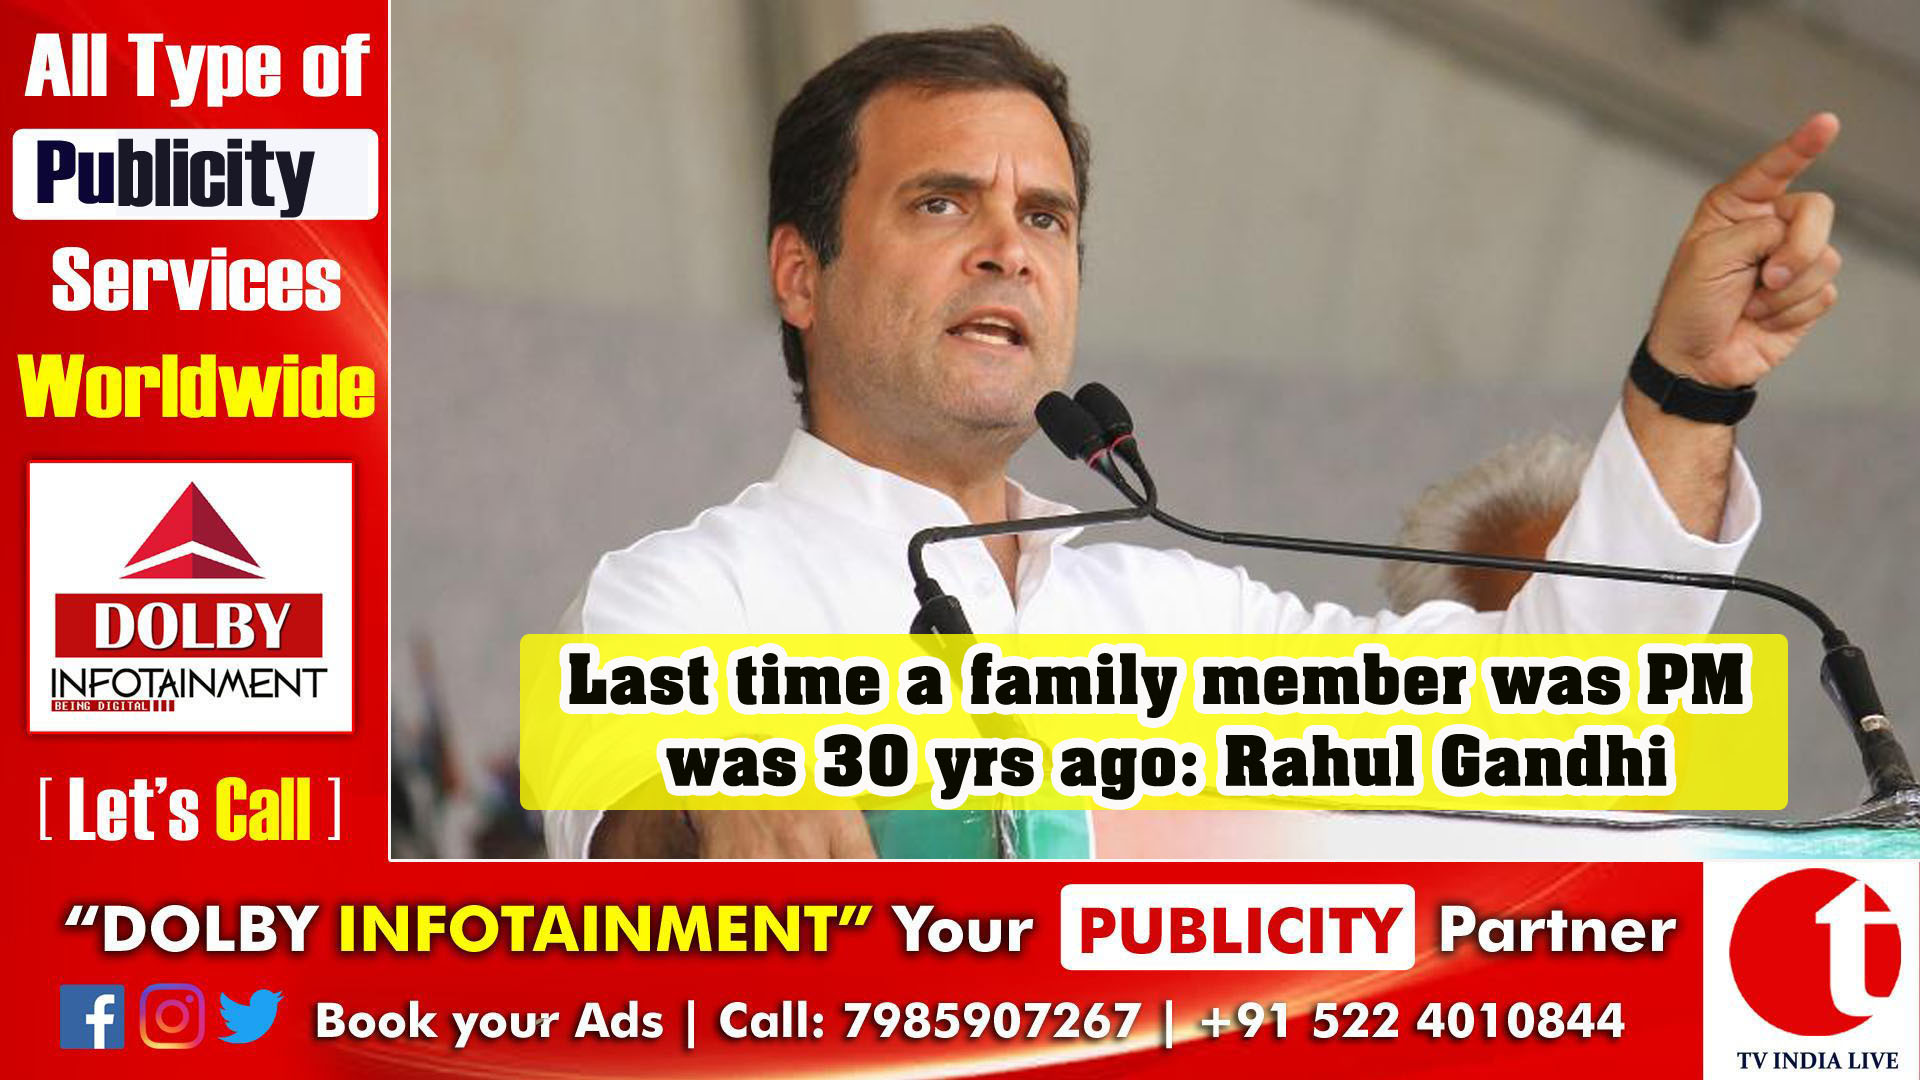 Last time a family member was PM was 30 yrs ago: Rahul Gandhi